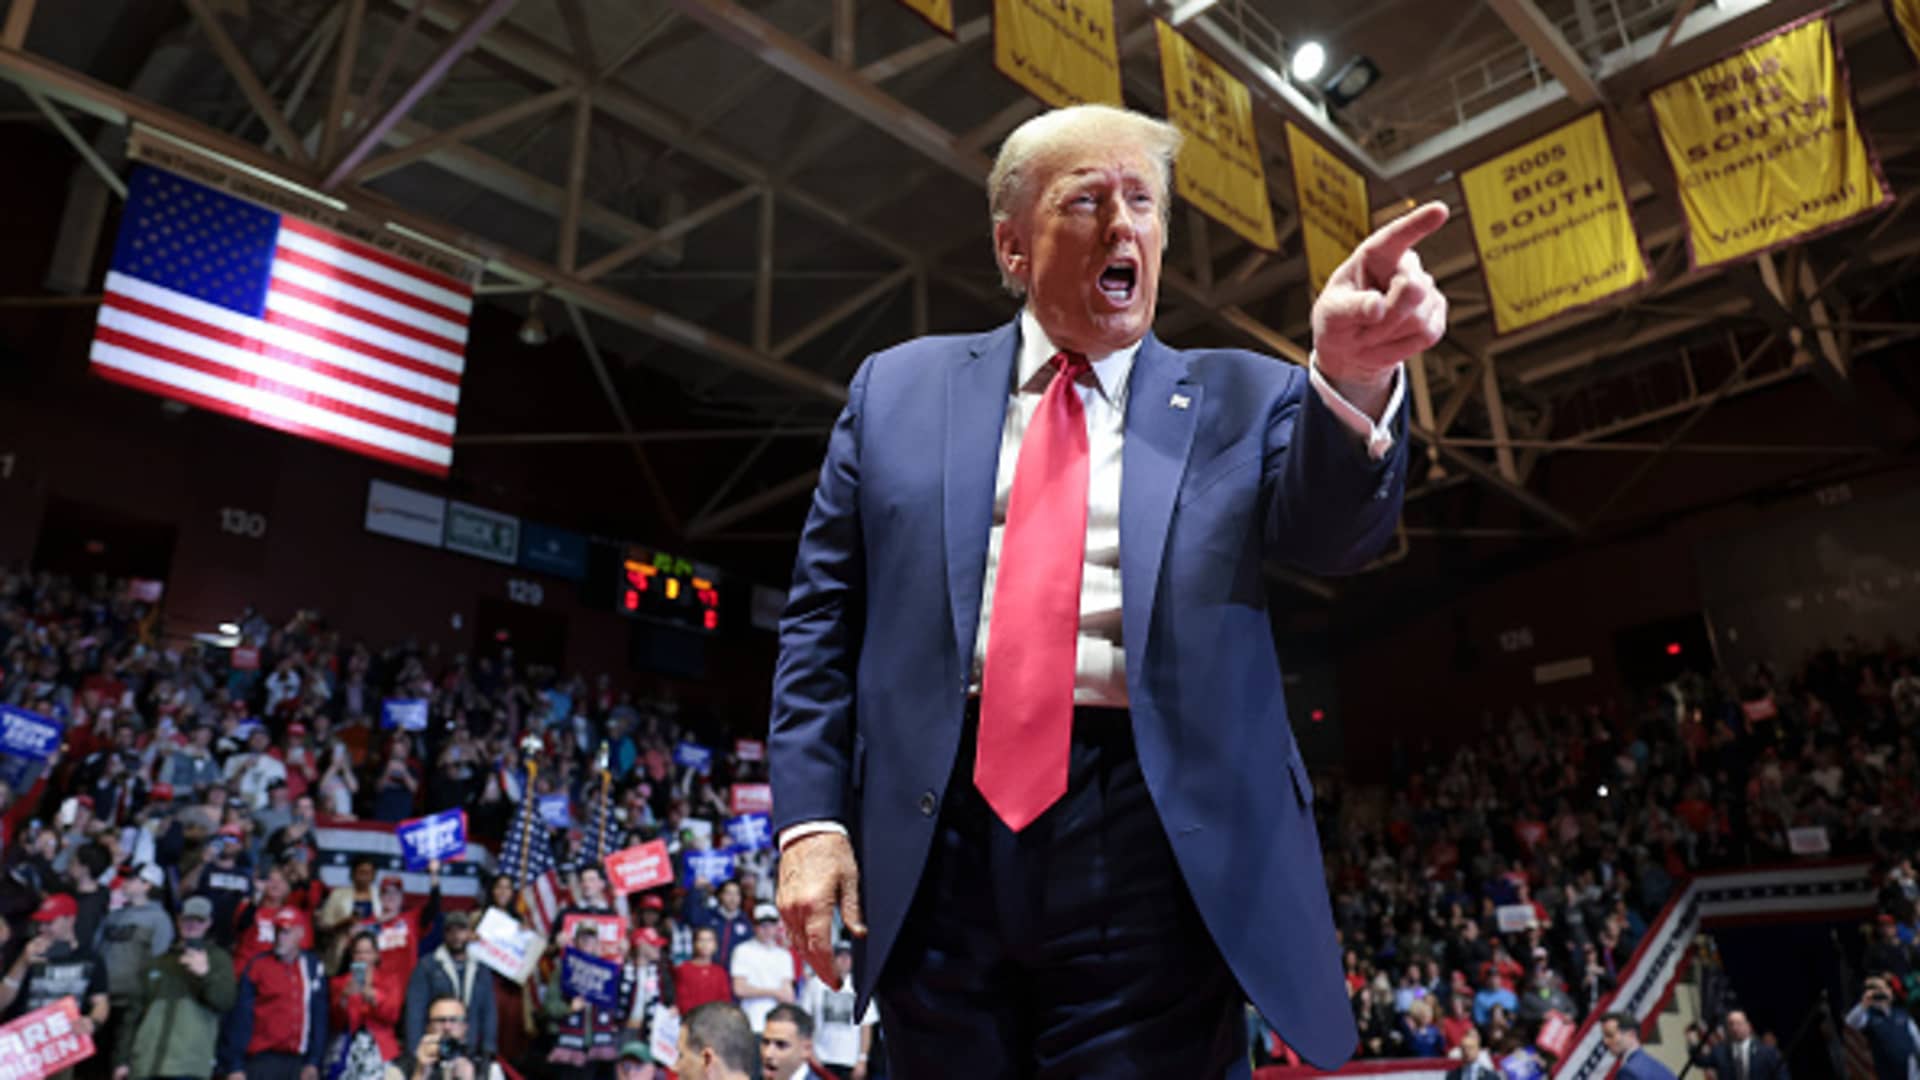 Republican presidential candidate and former President Donald Trump thanks supporters after speaking at a Get Out The Vote rally at Winthrop University on February 23, 2024 in Rock Hill, South Carolina.